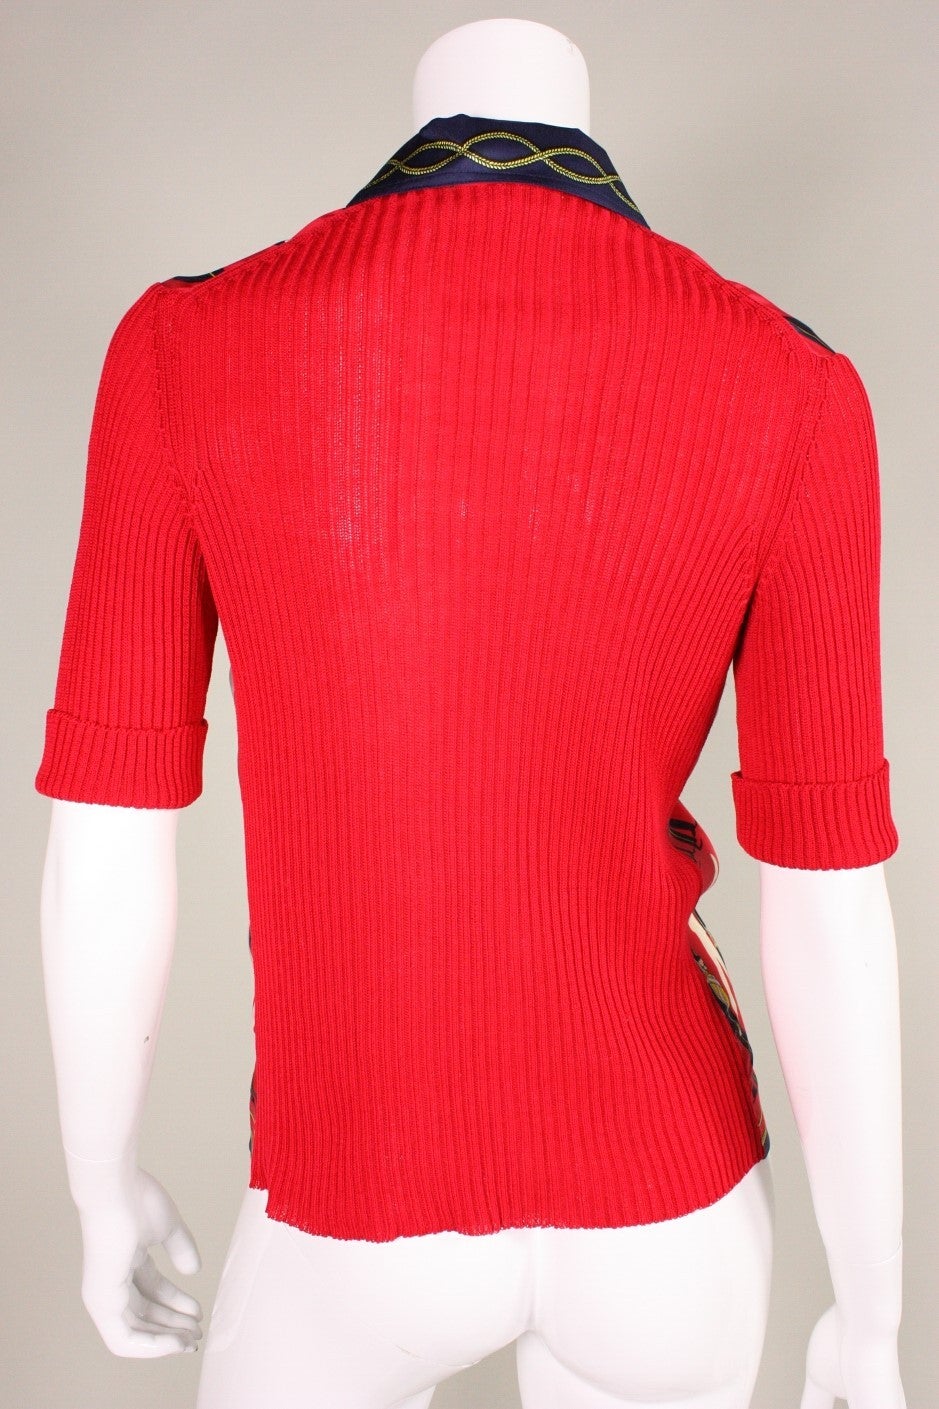 Women's 1960s Hermes Sweater with Soldier Print